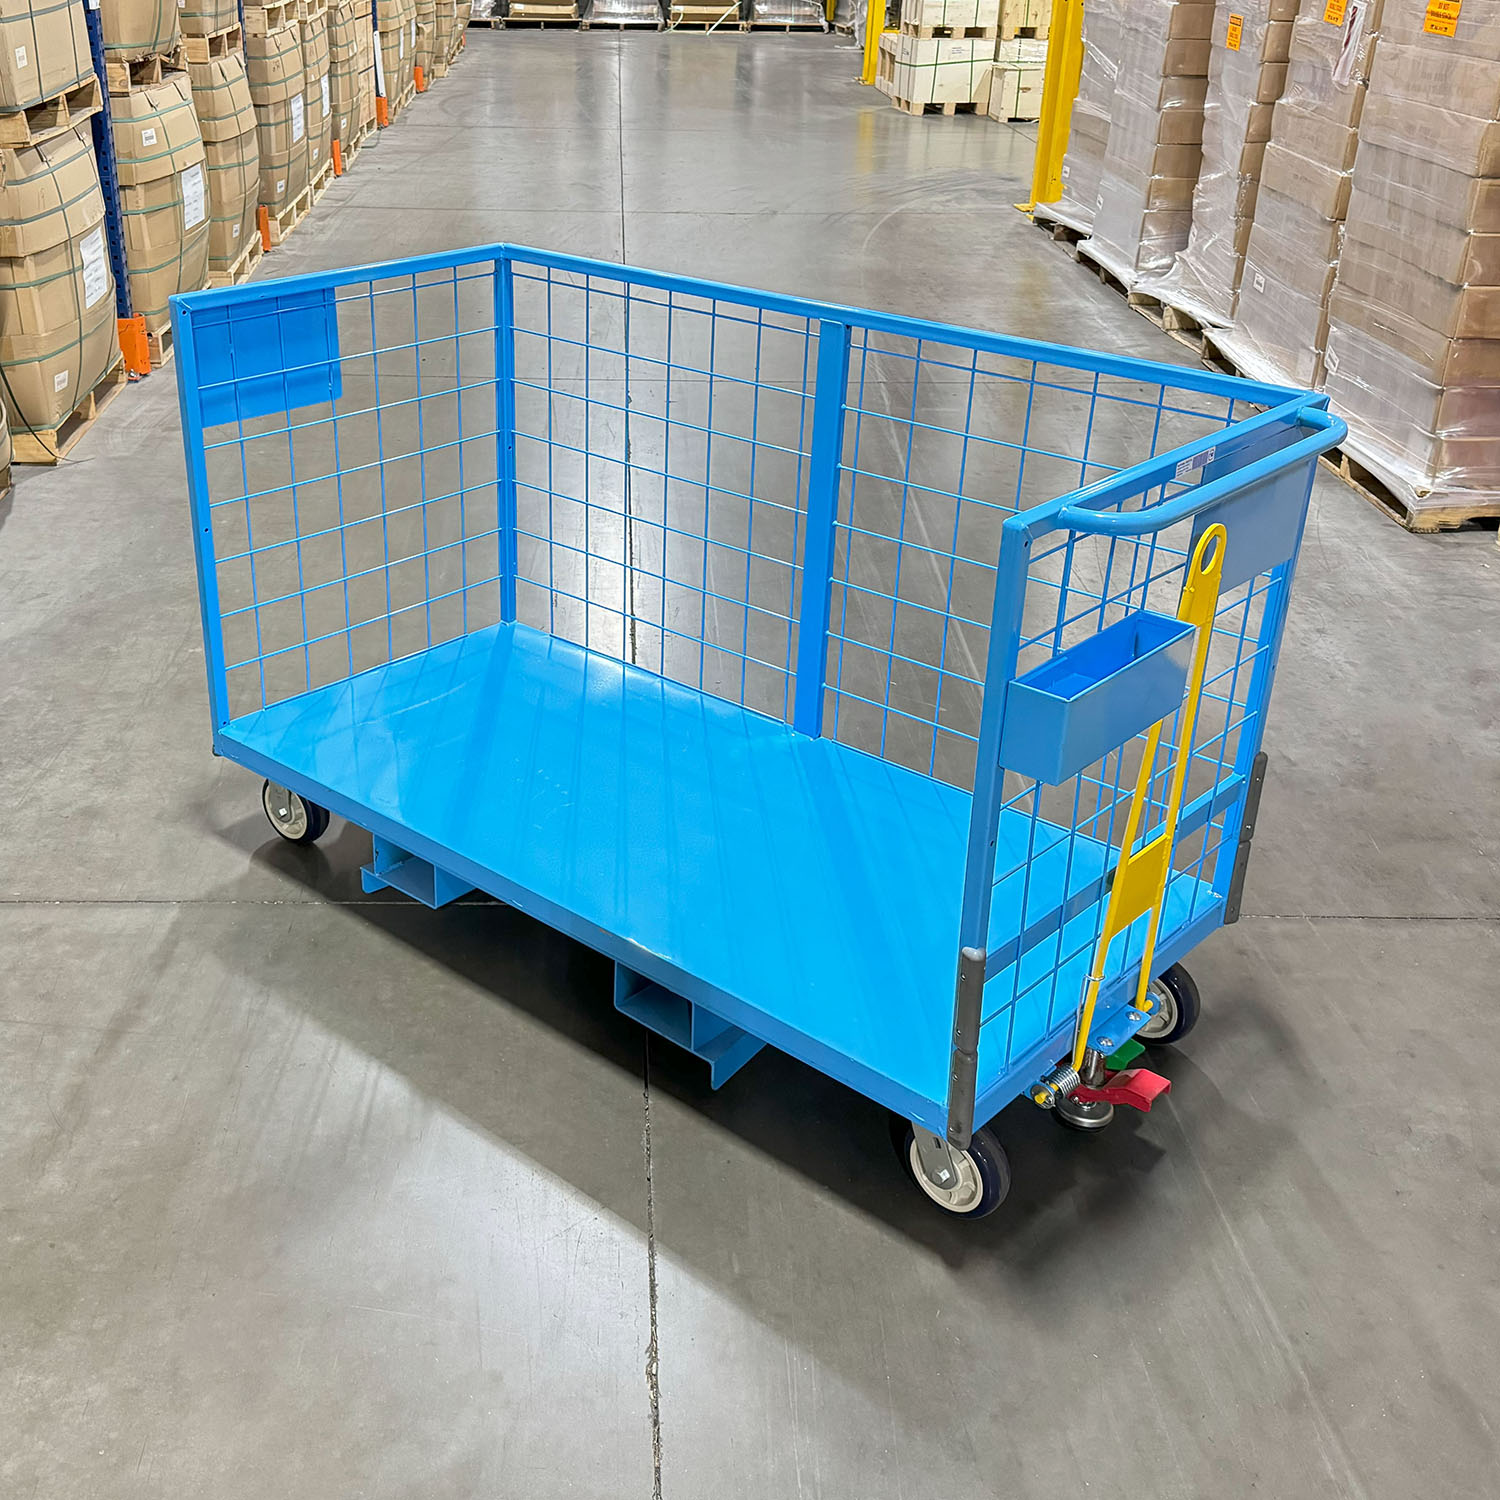 Fulfillment Pick Cart Keywords: Fulfillment cart Order picking cart Warehouse pick cart Order fulfillment cart Inventory picking cart Distribution pick cart Material handling cart Warehouse organization cart Storage and retrieval cart Cart for order fulfillment Spring-Loaded Tow Bar Keywords: Spring-loaded tow bar Tow bar for carts Tugger tow bar Cart towing system Spring hitch for carts Towing mechanism for carts Cart attachment tow bar Cart tow hitch Spring-coupled tow bar Cart transport system Combined Keywords: Fulfillment pick cart with tow bar Spring-loaded cart for order picking Towable order fulfillment cart Cart with towing capability Integrated tow bar pick cart Warehouse towable pick cart Towable material handling cart Spring-loaded cart for warehouse picking Order picking cart with tow hitch Tugger-compatible pick cart Industry and Use Case Keywords: Warehouse logistics solutions E-commerce fulfillment equipment Distribution center carts Industrial order picking tools Warehouse productivity solutions Logistics and supply chain equipment Material handling solutions Cart towing in warehouses Order fulfillment efficiency tools Cart mobility enhancements